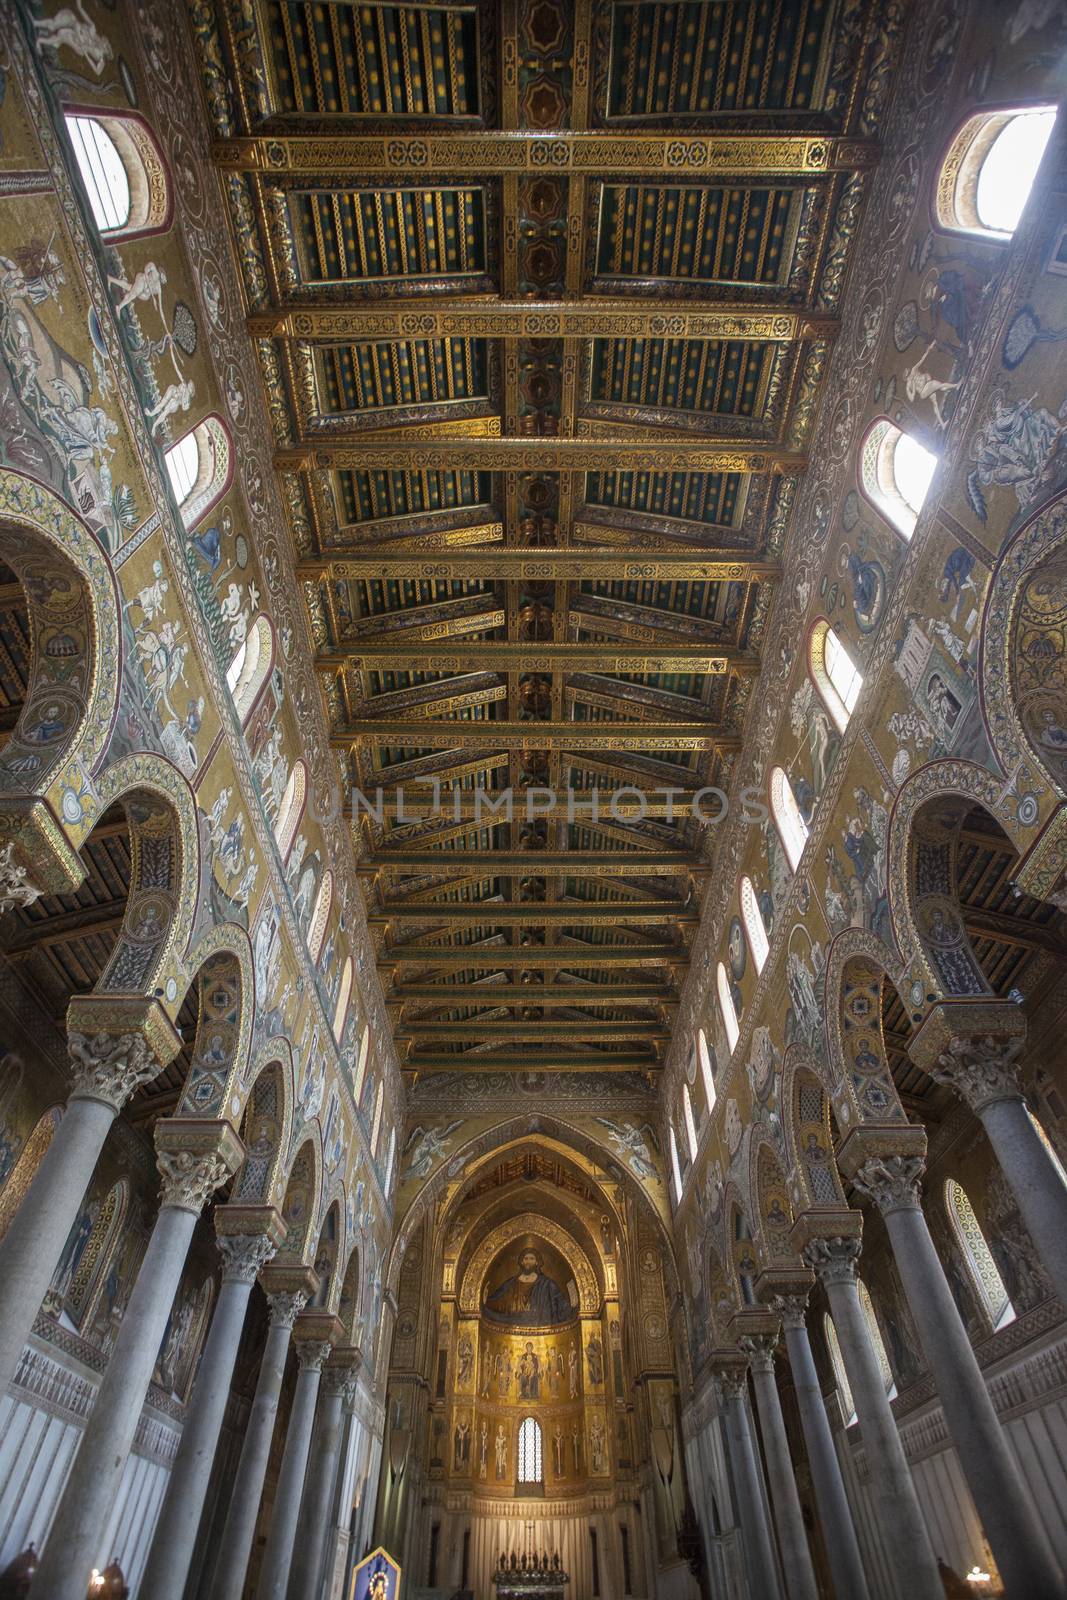 Interior of the Church of Monreale, in Sicily: a magnificent example of historic architecture in the town near Palermo